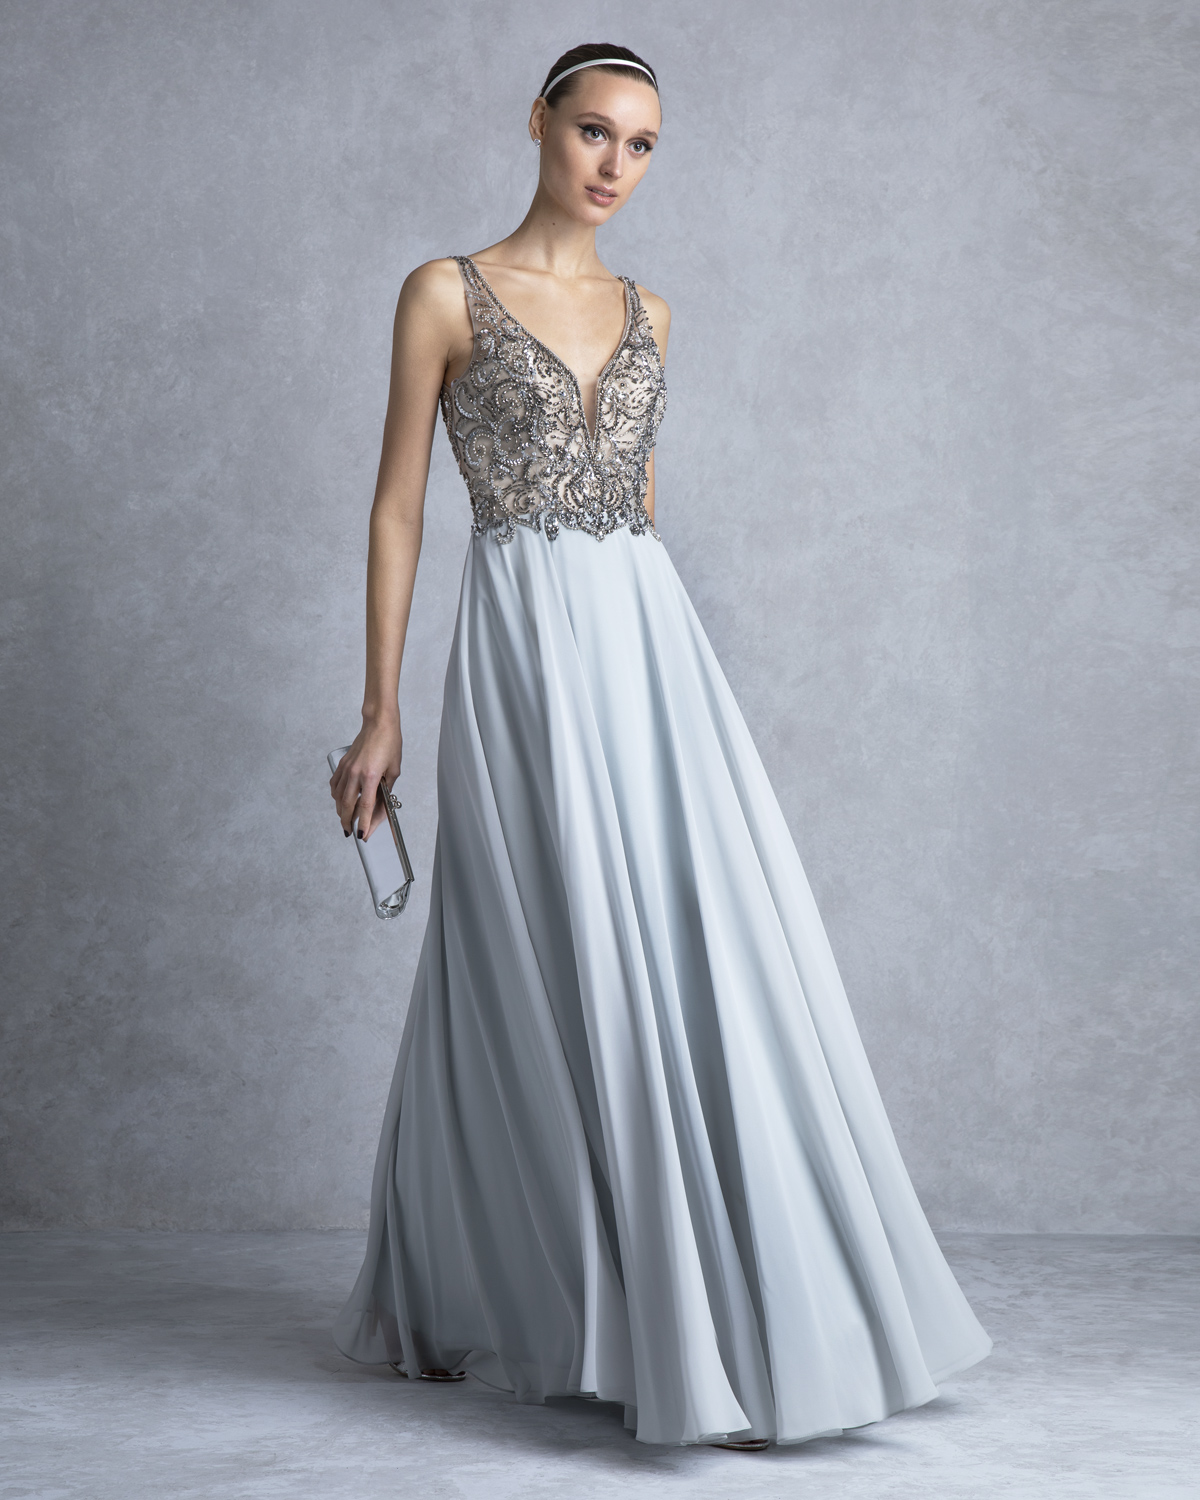 Evening Dresses / Long evening dress with beaded top and chifon skirt